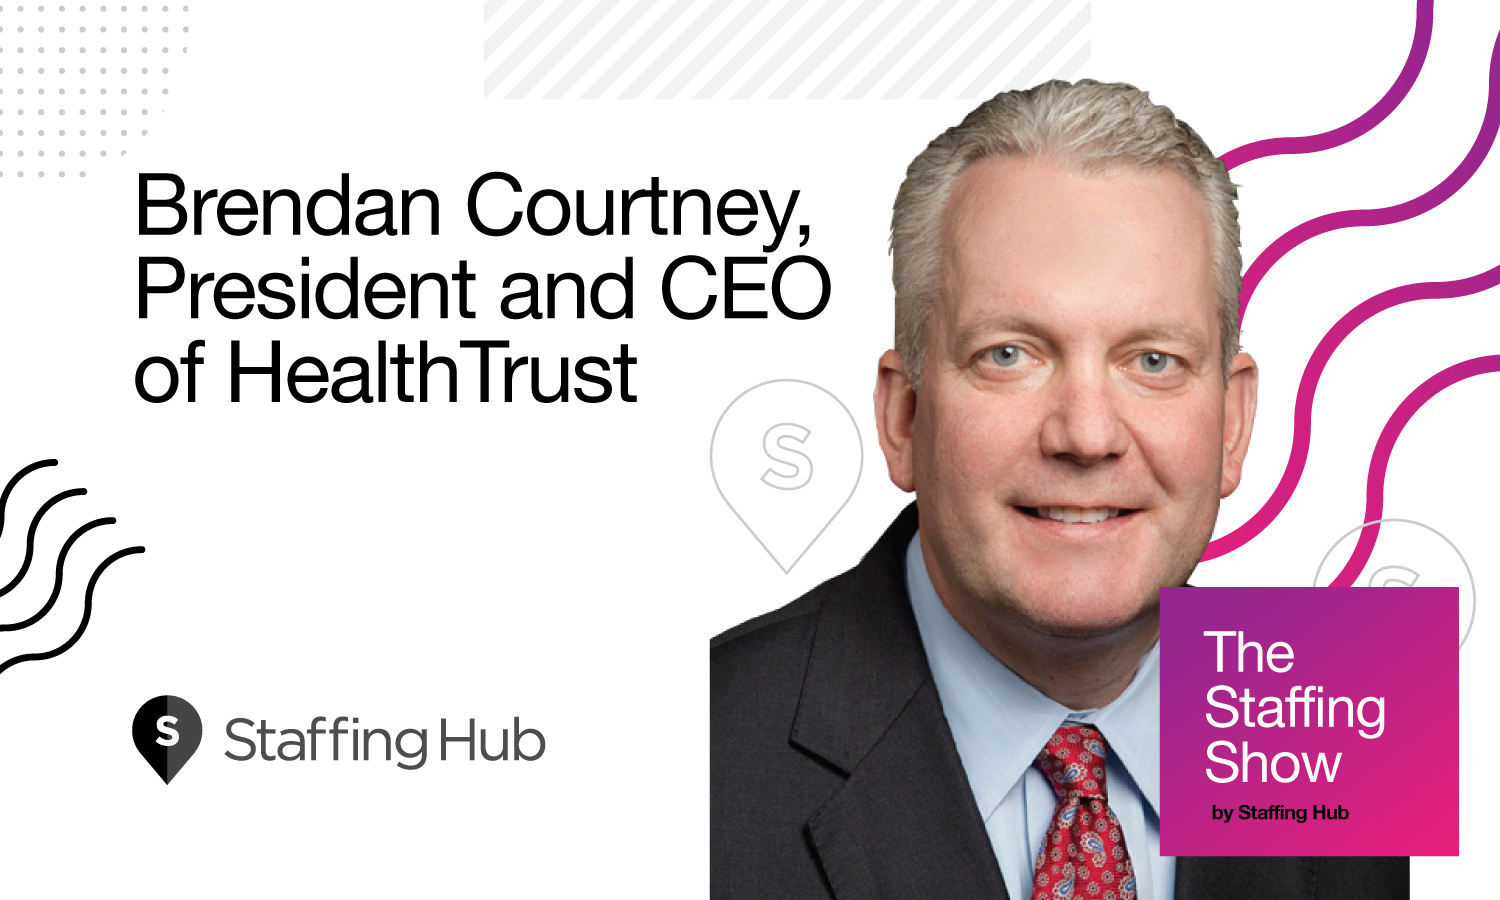 The Staffing Show - Episode 6 - Brendan Courtney, President and CEO of HealthTrust, on Their Wild Growth and the Solution to the Nursing Skills Gap